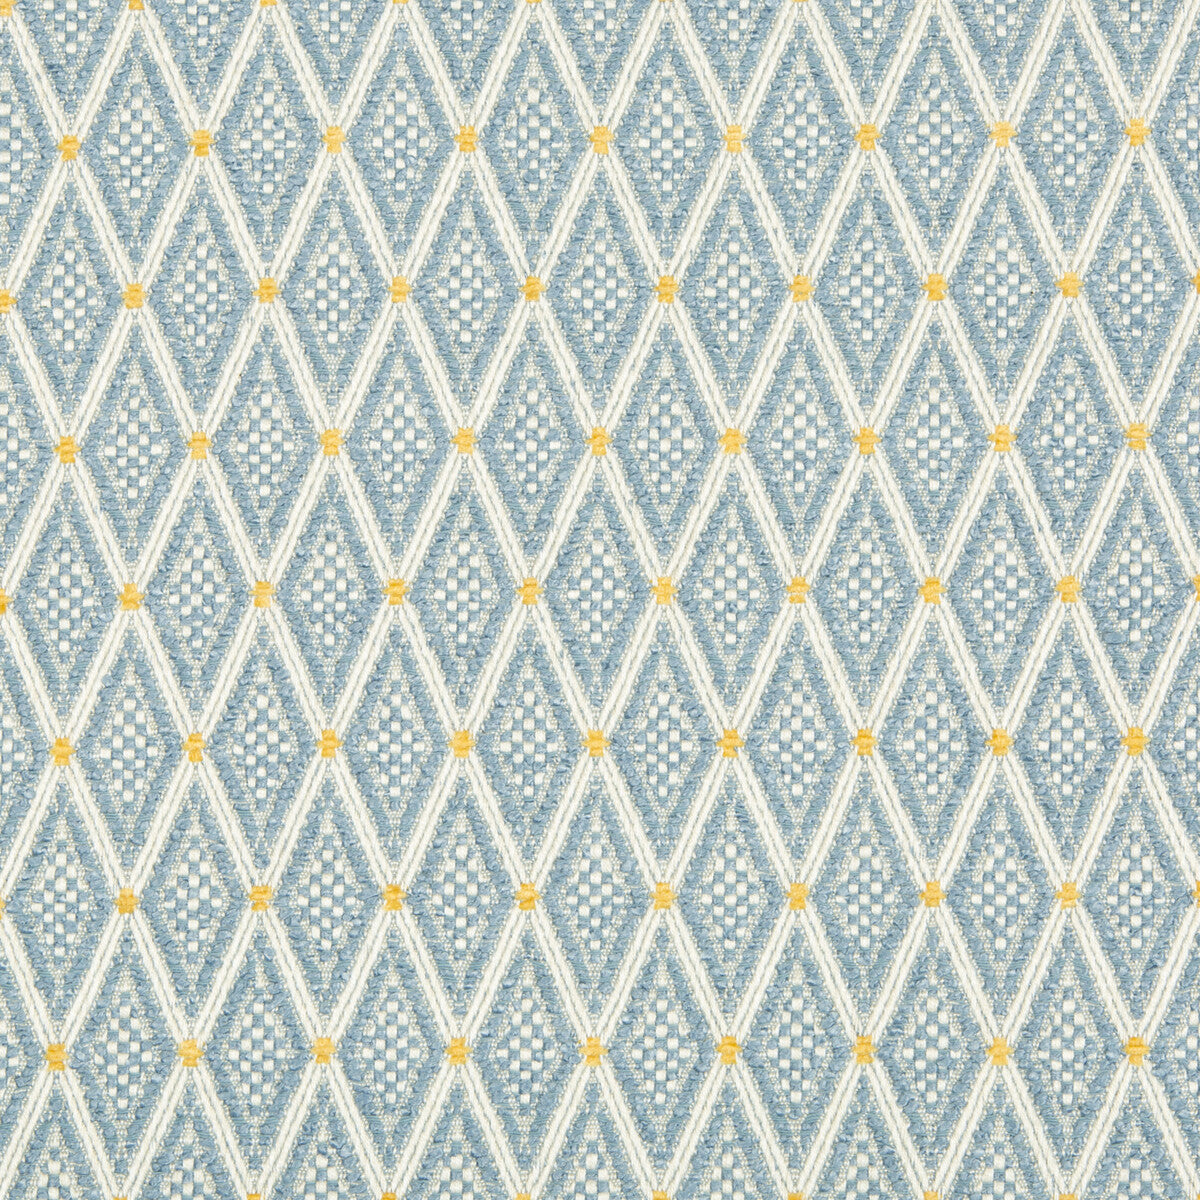 Kravet Design fabric in 34699-54 color - pattern 34699.54.0 - by Kravet Design in the Crypton Home collection